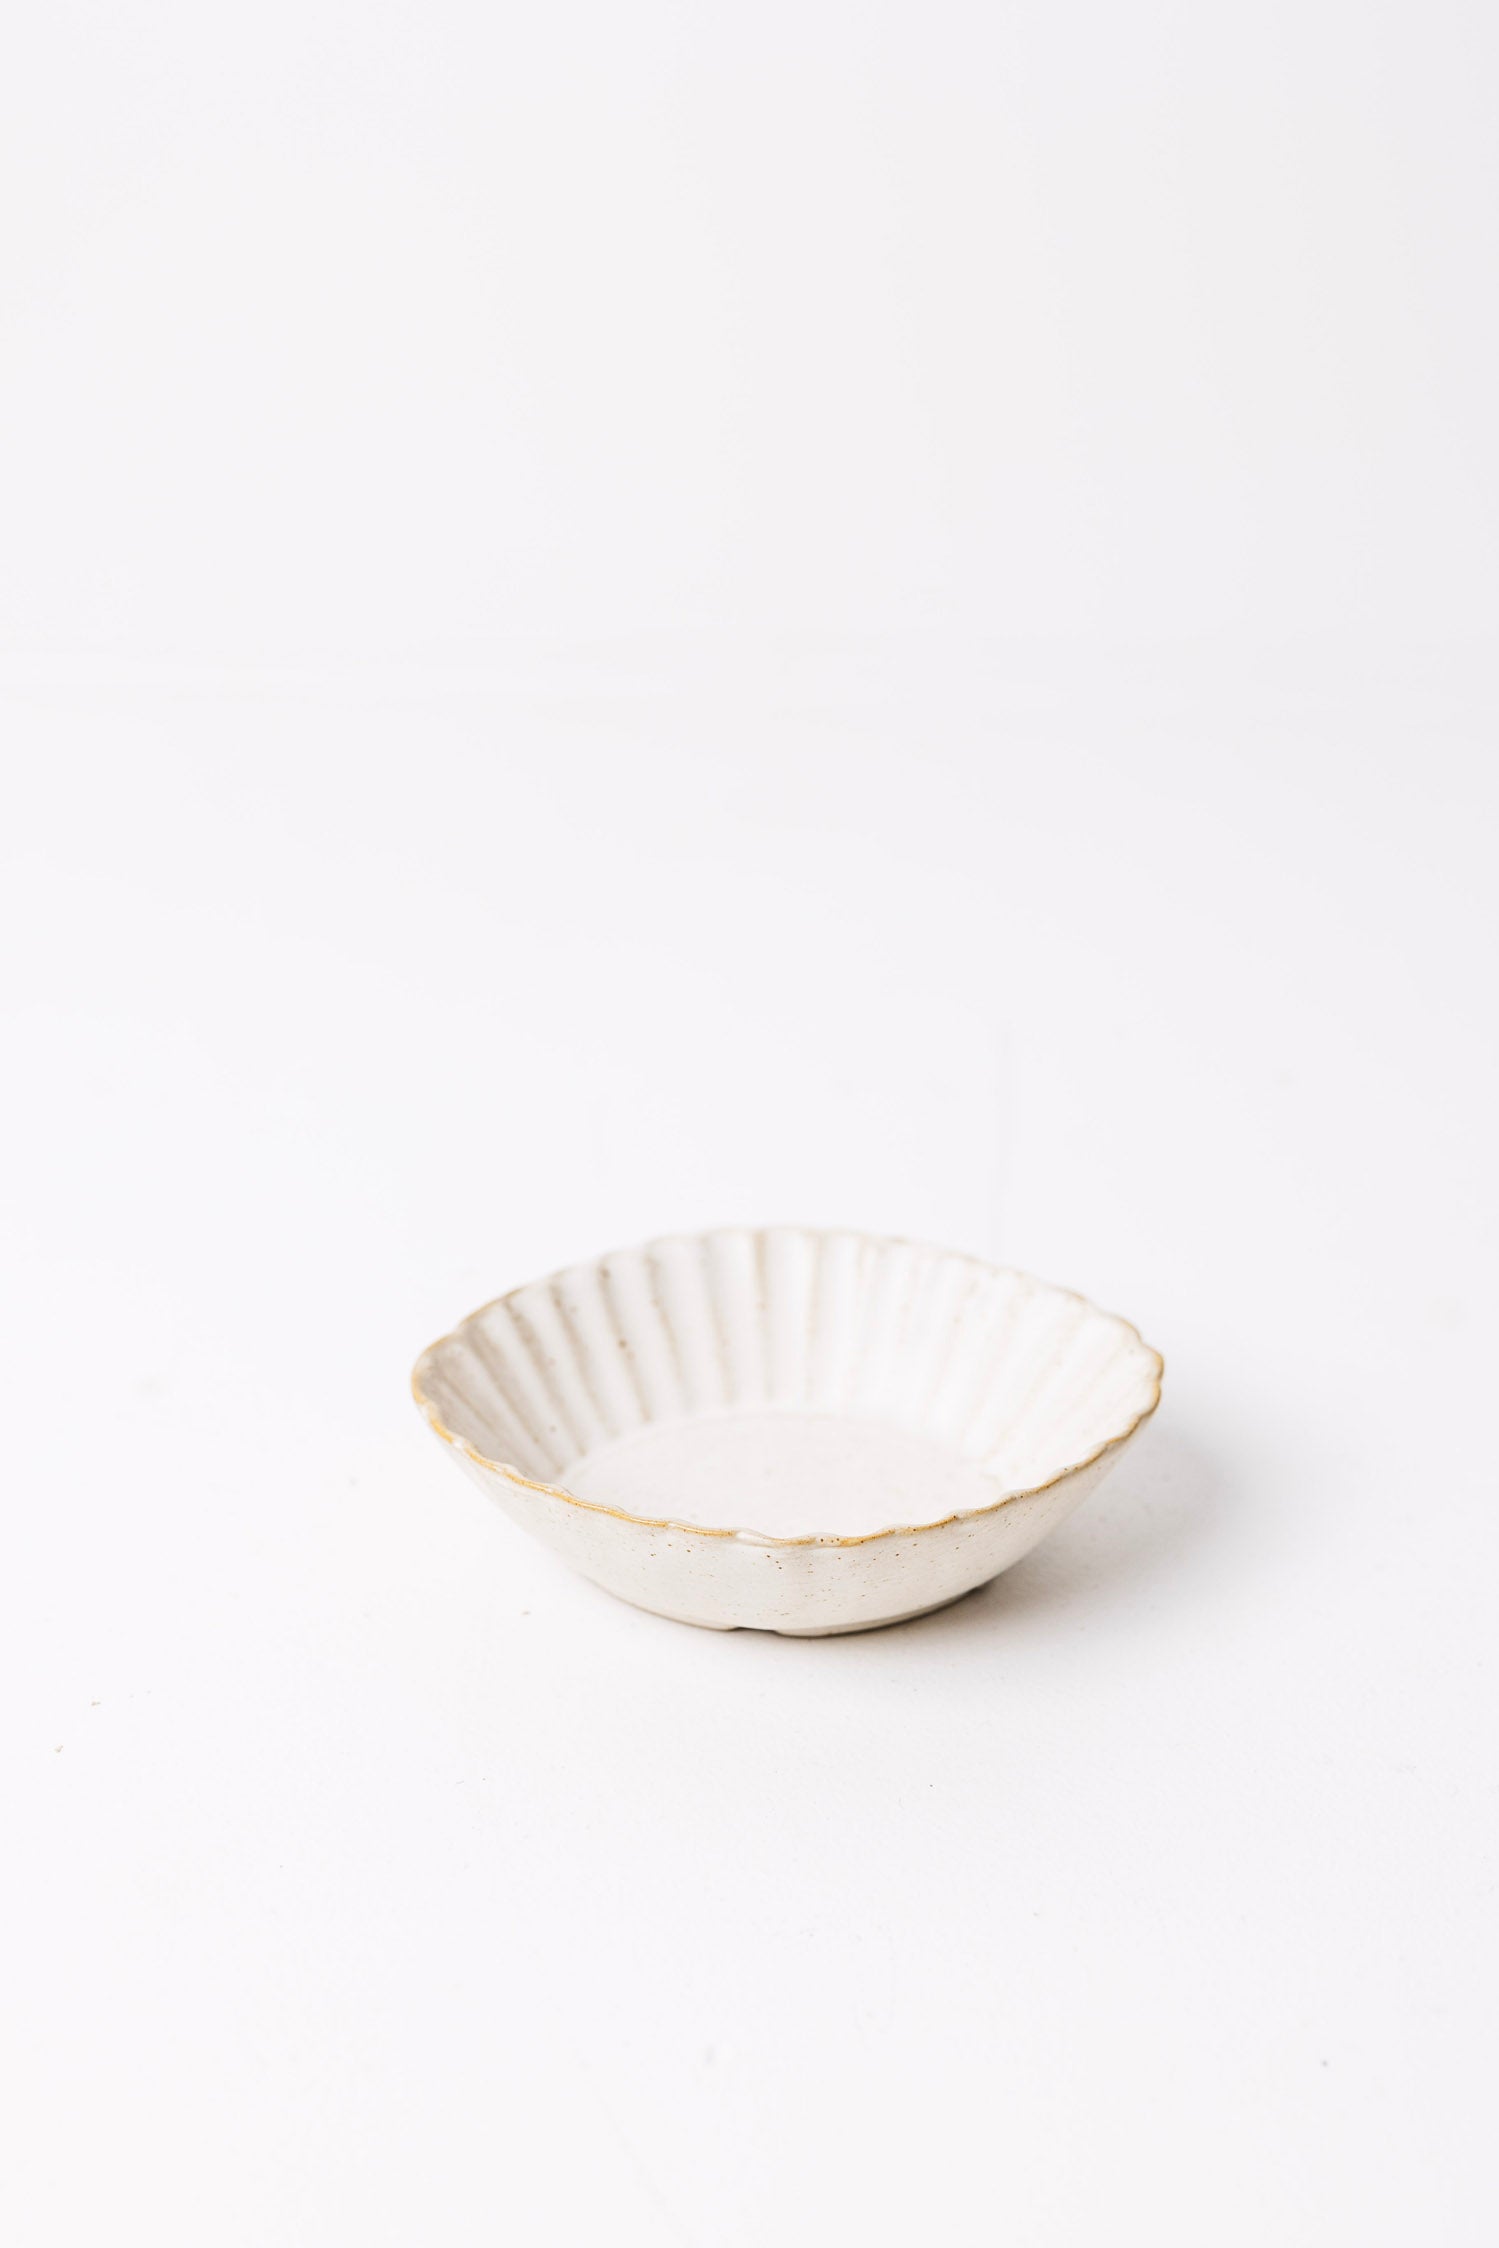 Clement Scallop Bowl - 2 Styles